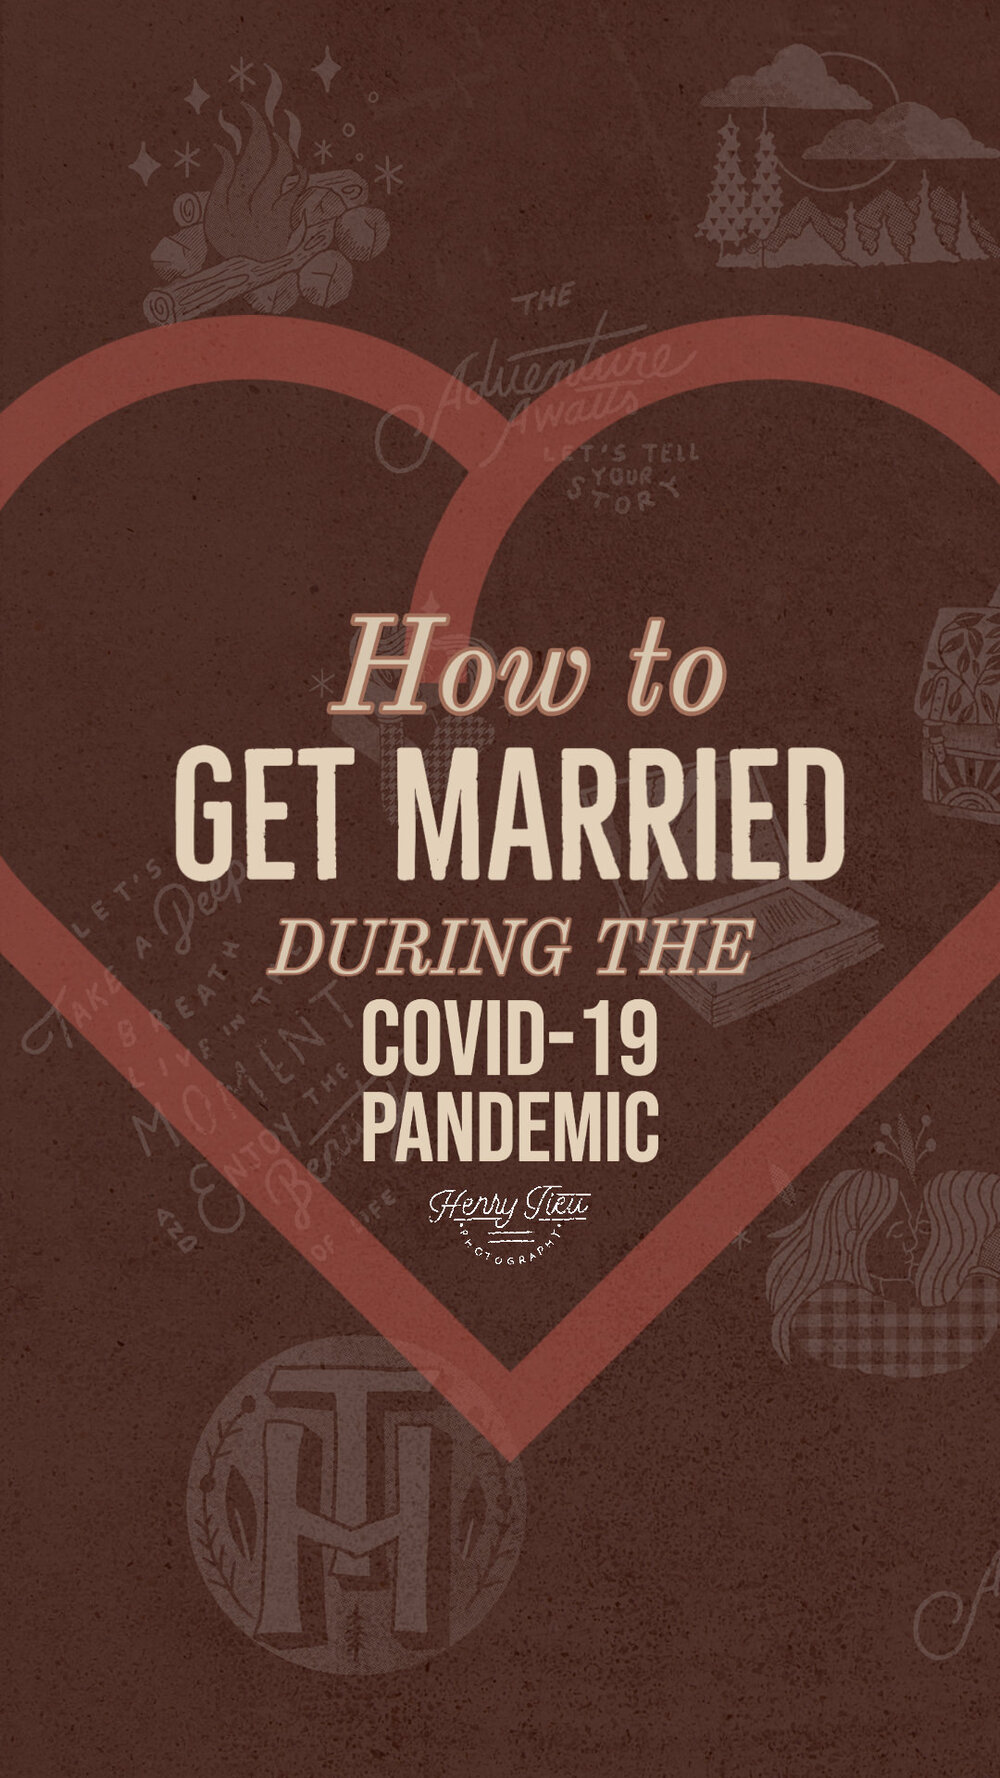 how to get married during the Covid-19 Pandemic